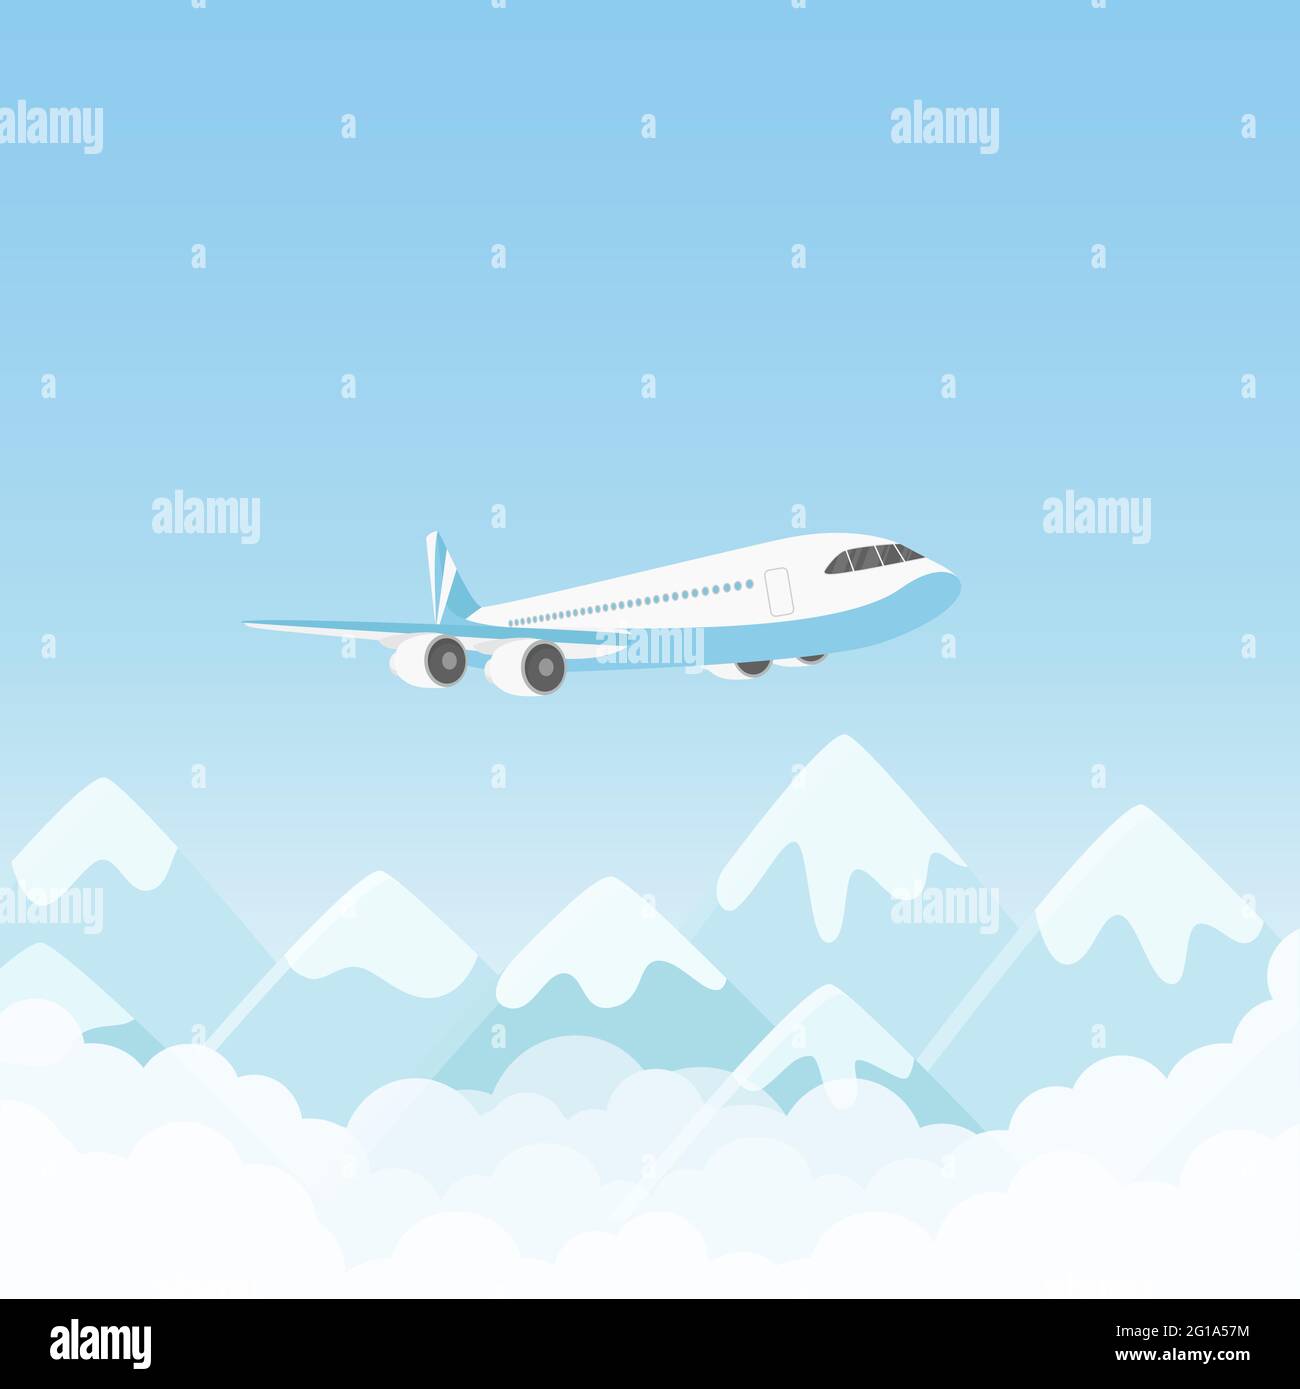 Airplane flight, air plane flying over mountains in blue sky vector illustration. Cartoon charter aircraft with passengers or cargo freight transport travel, international transportation background Stock Vector